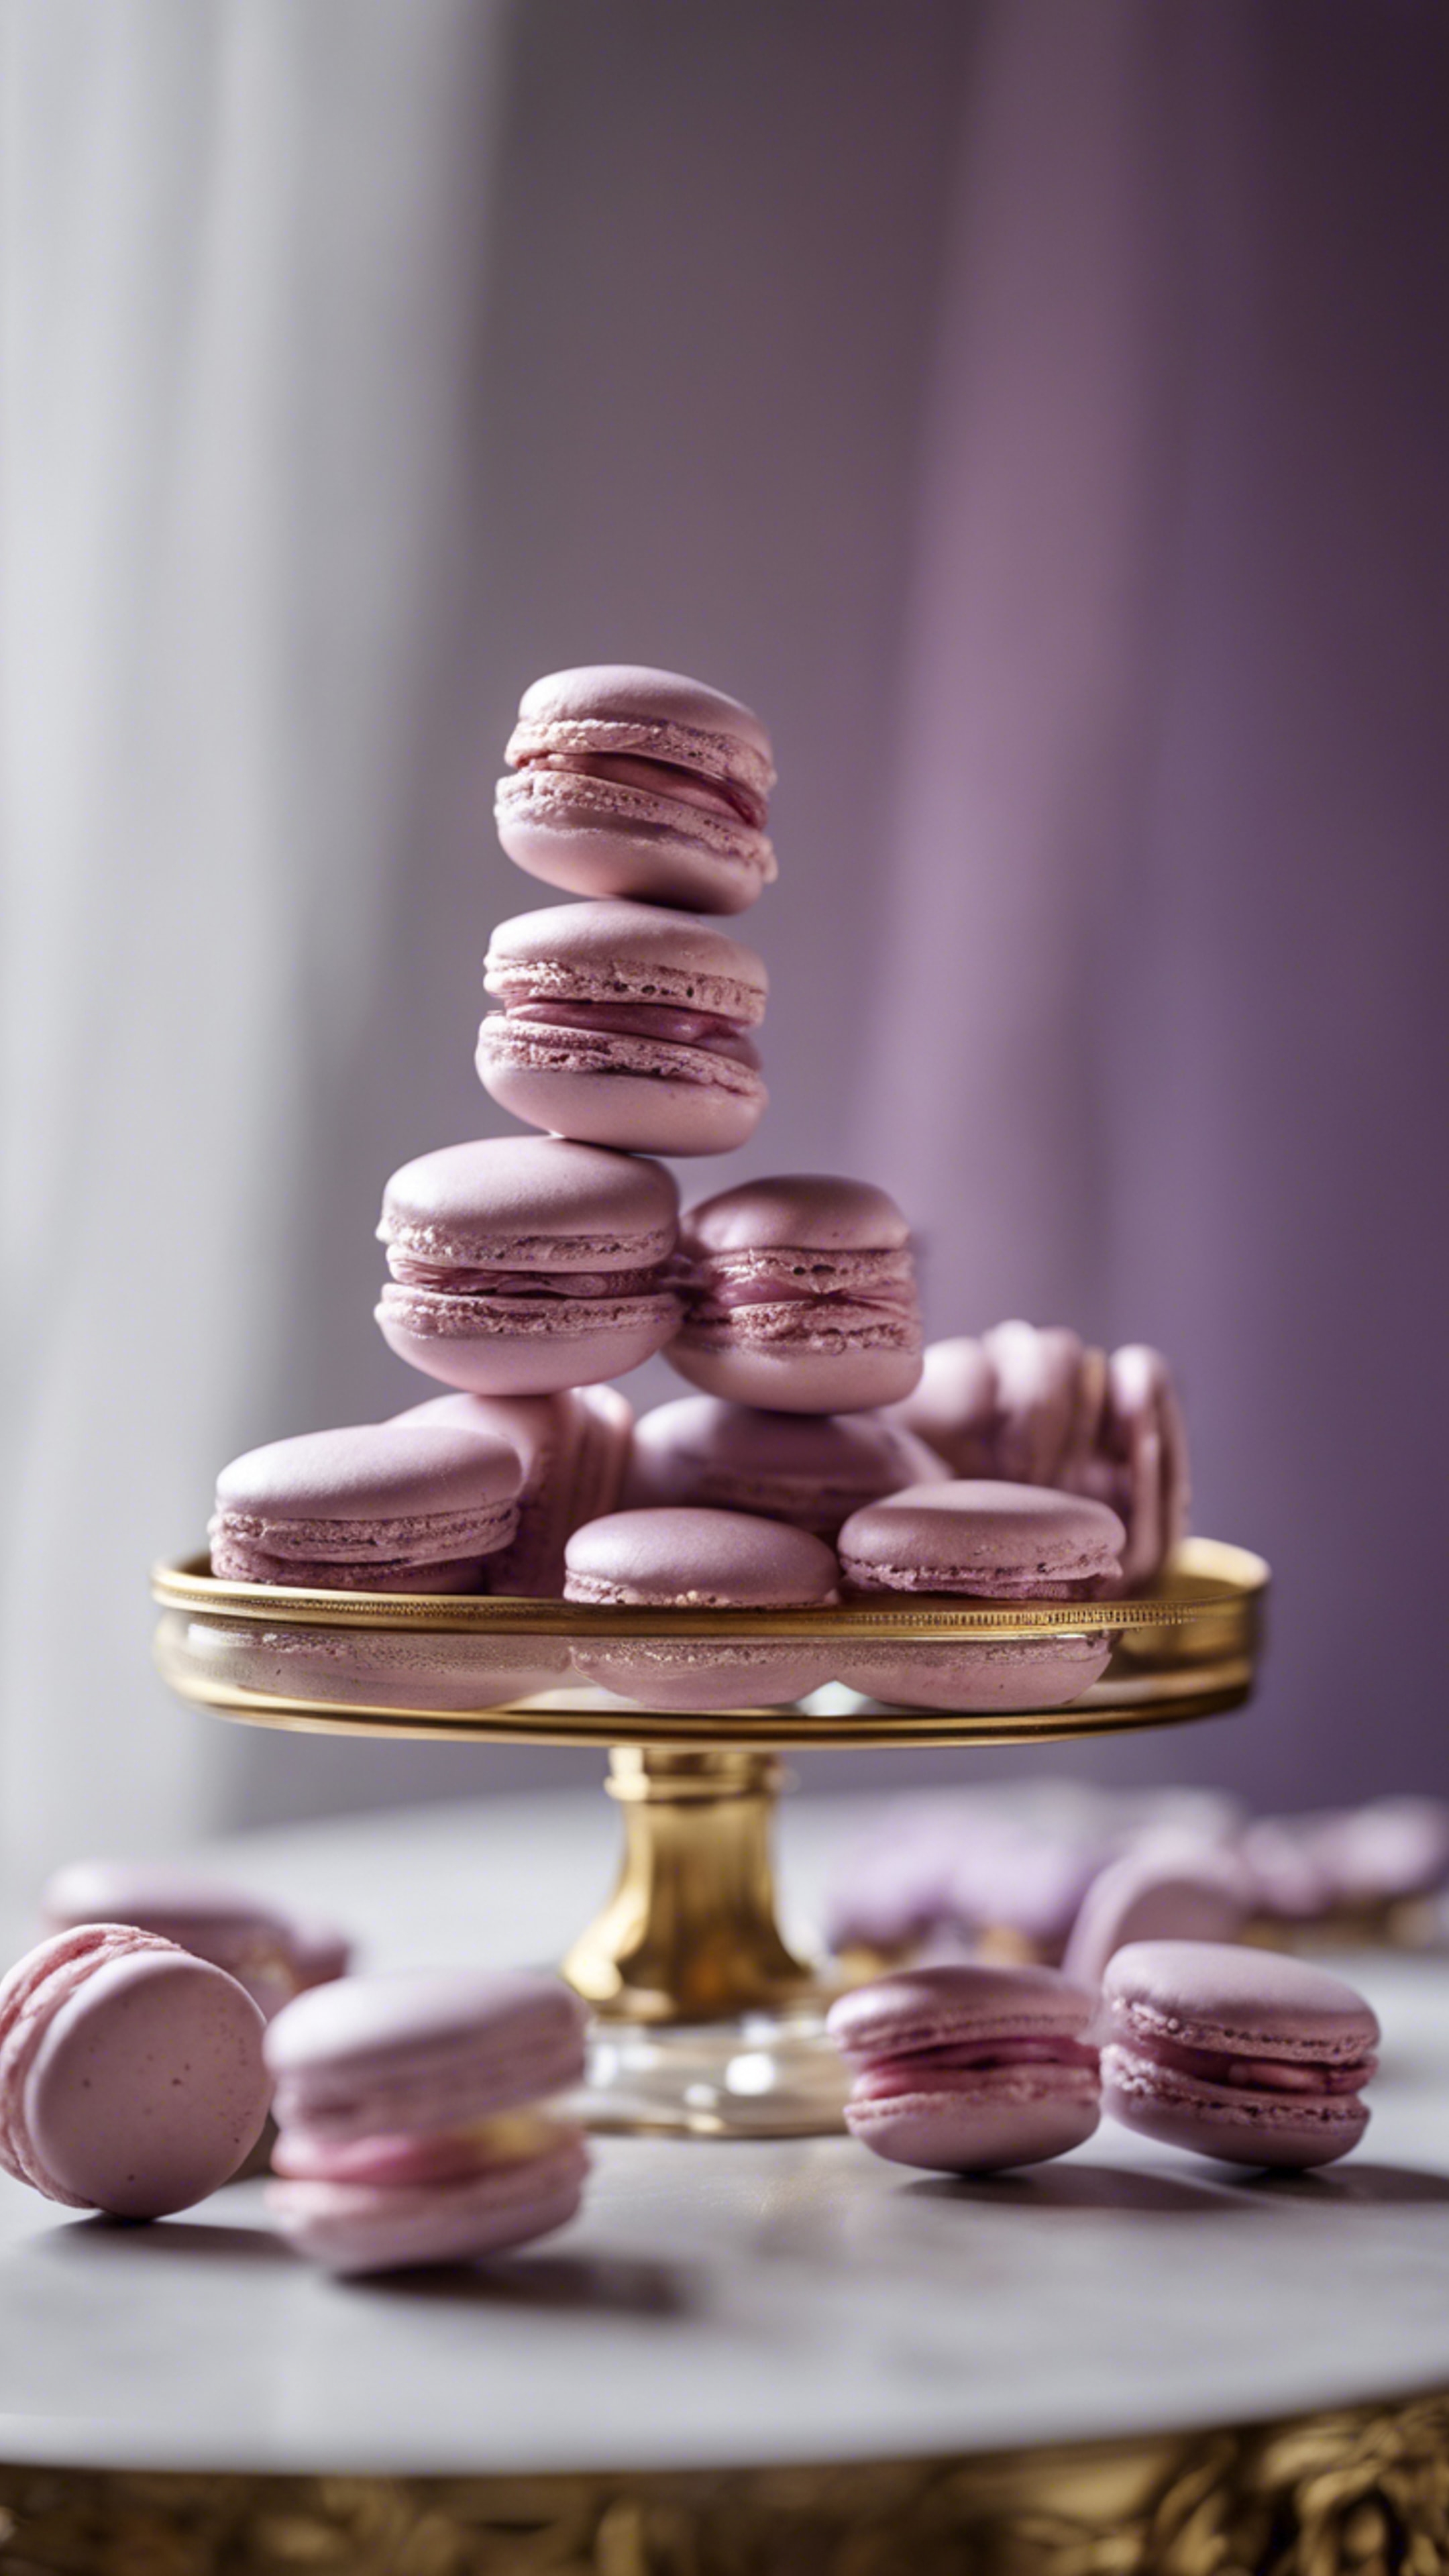 A box of light purple macarons perched on a chic, creamy pedestal table.壁紙[d2f6108c9ad74ba2a0c7]